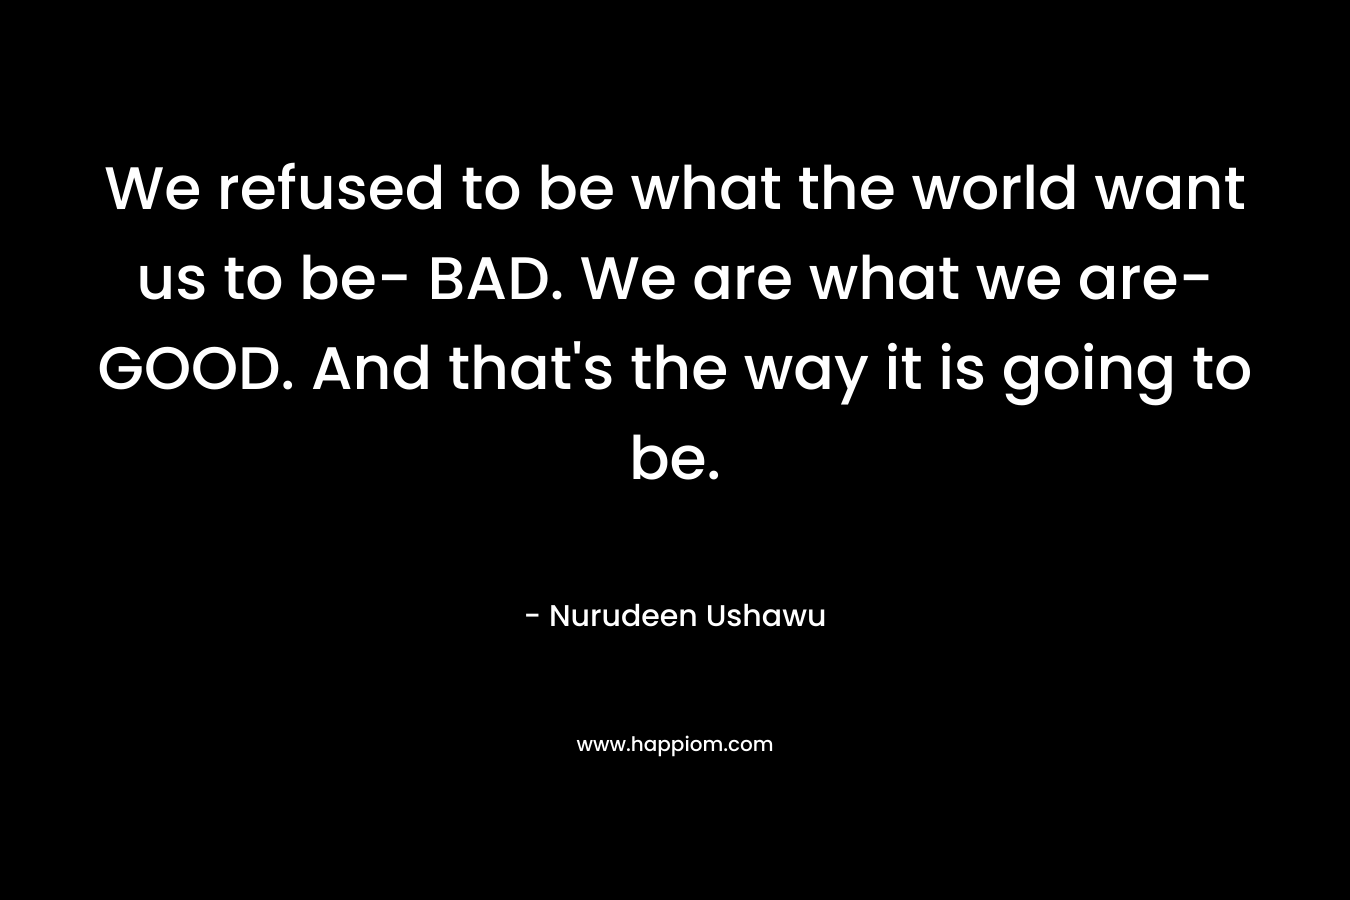 We refused to be what the world want us to be- BAD. We are what we are- GOOD. And that's the way it is going to be.